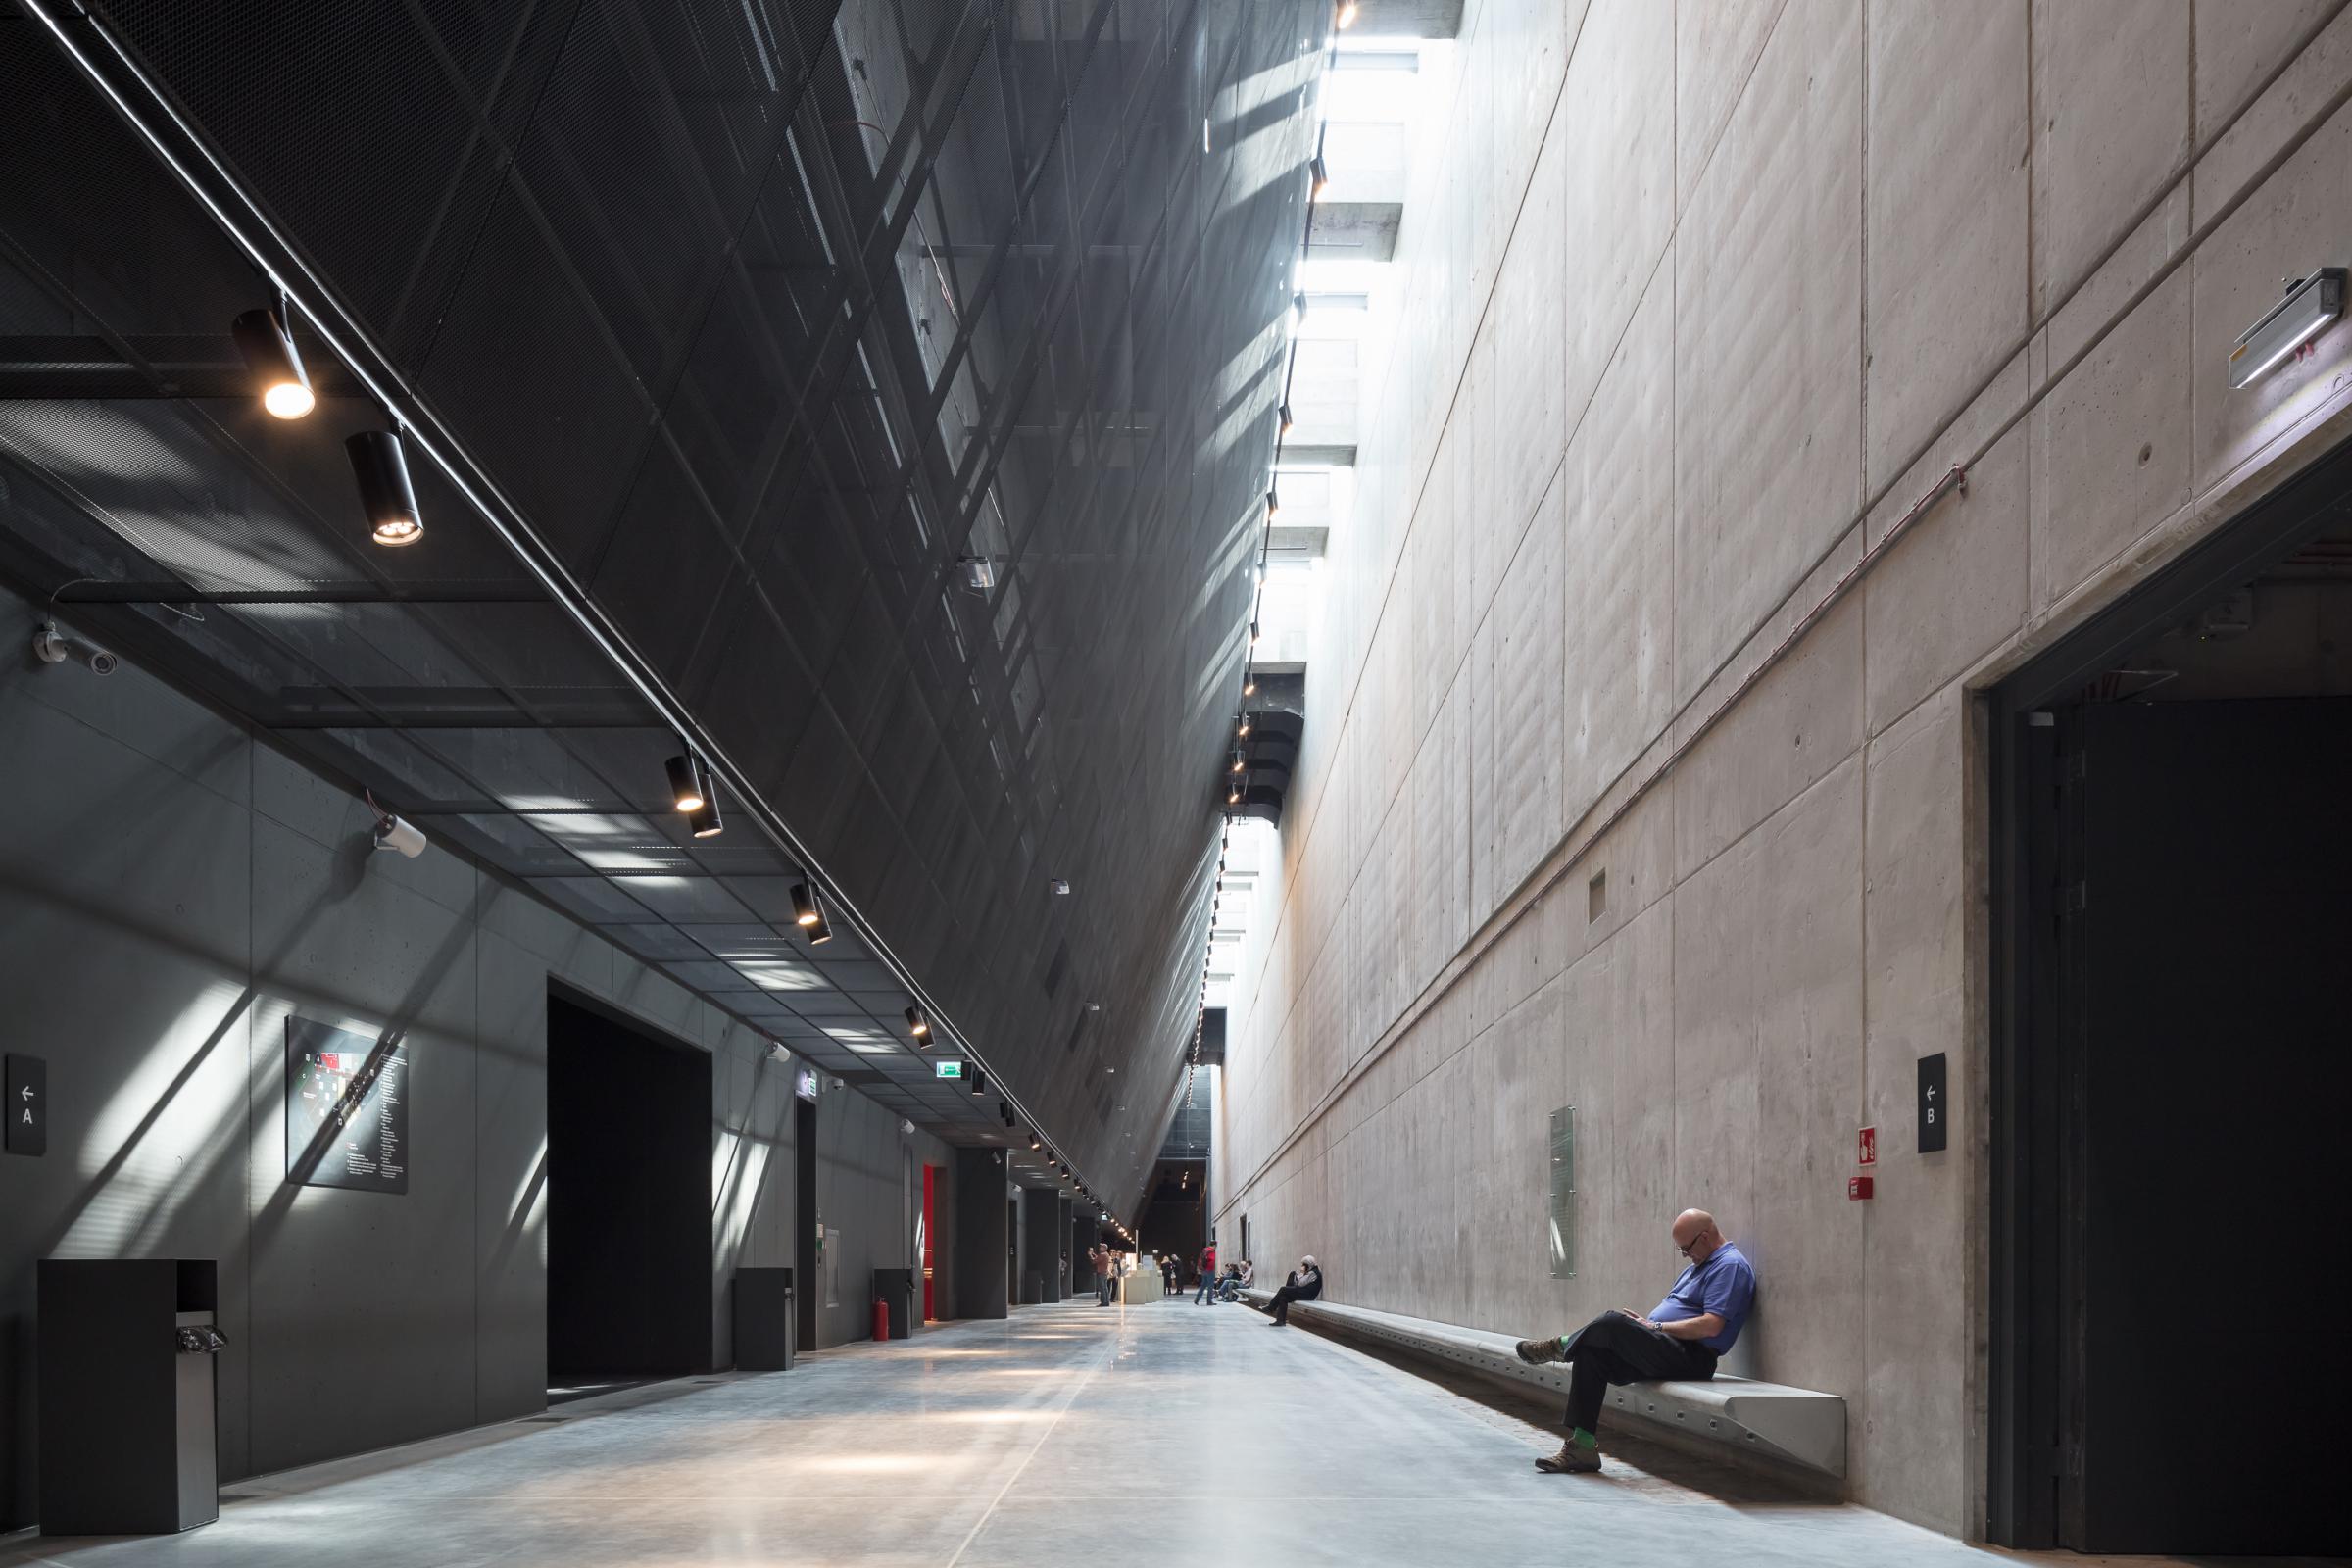 Photograph of Museum of the Second World War, designed by Kwadrat Studio Architektoniczne and located in Gdańsk, Poland